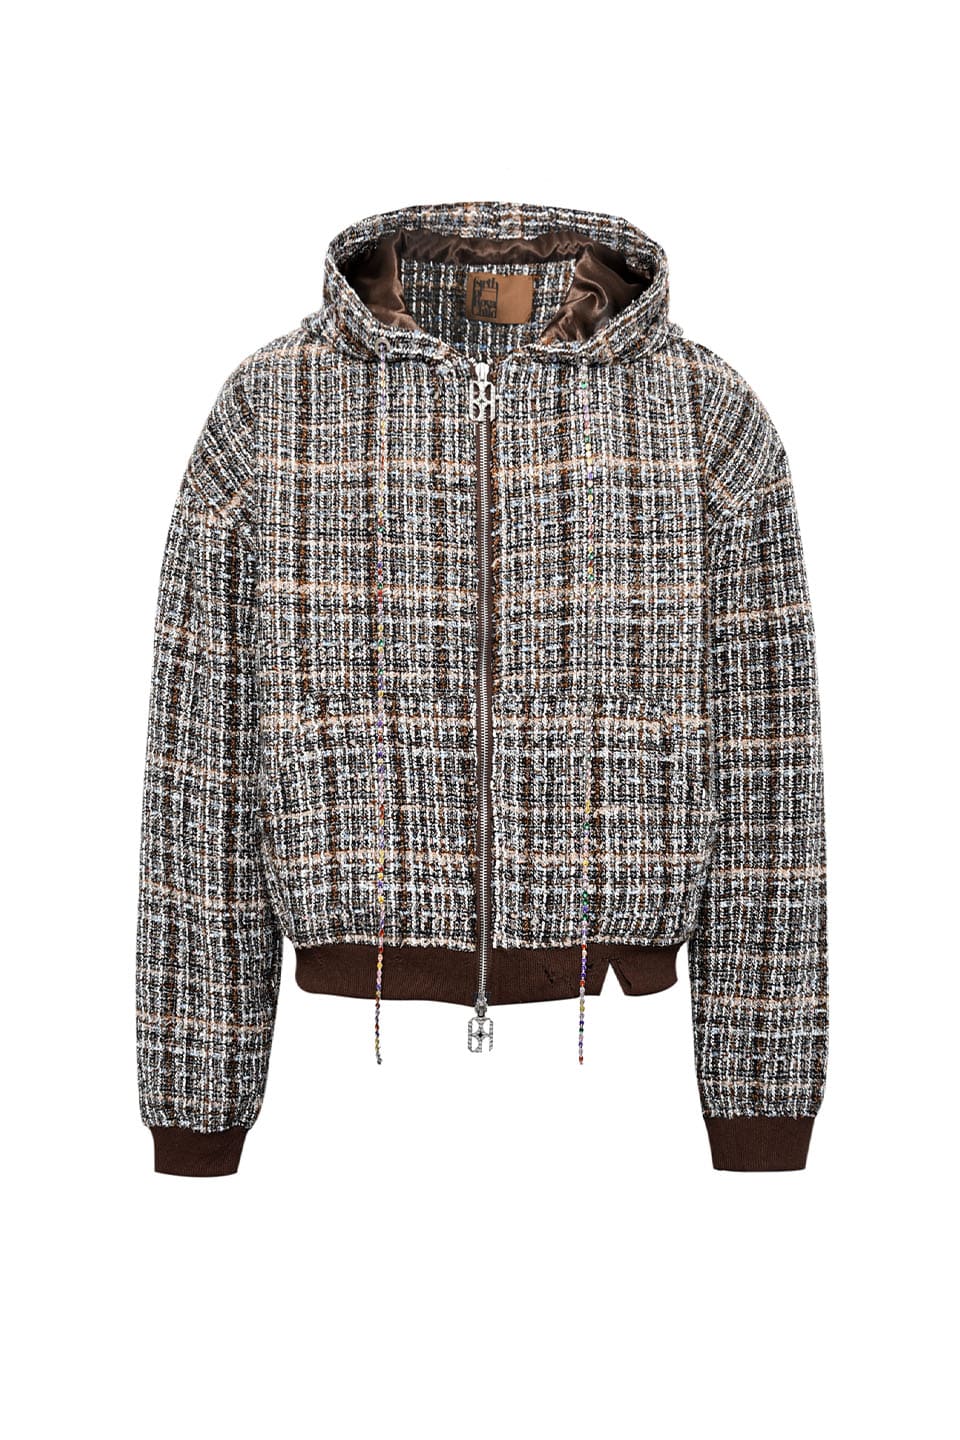 Maillard Fancy Tweed Hoodie With Colorful Jewels Chain